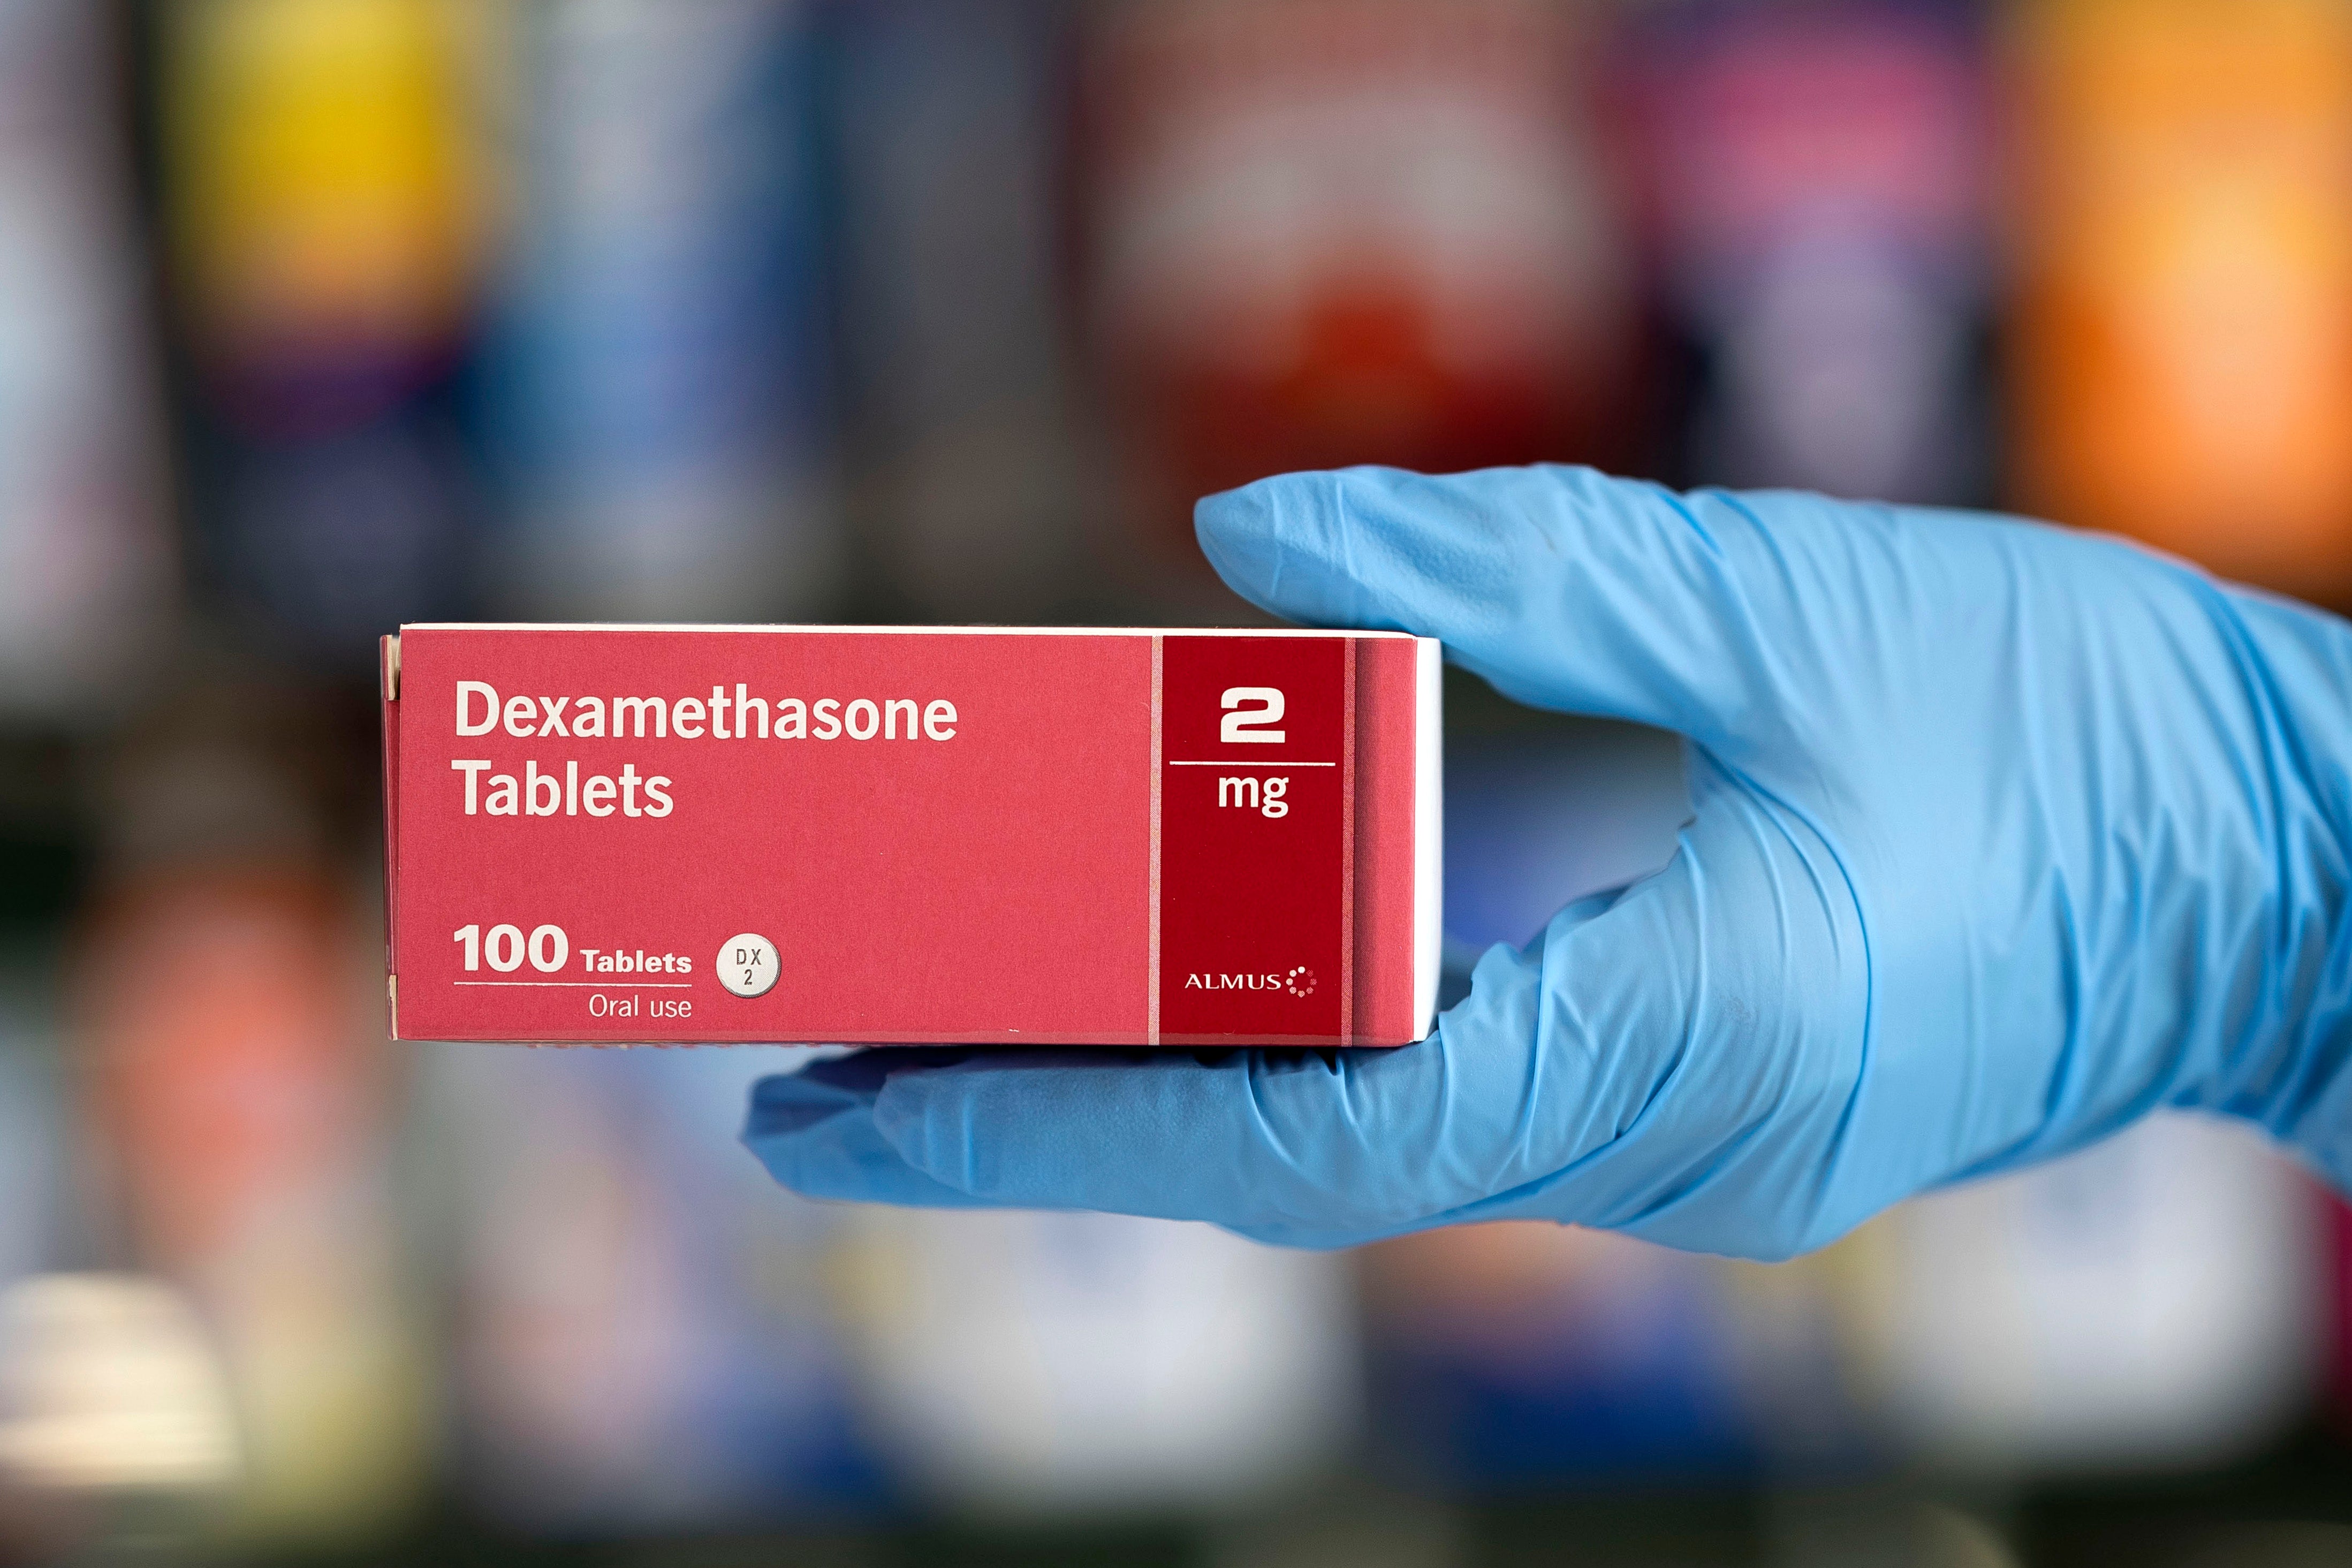 It has been estimated that dexamethasone may have saved a million lives in the first nine months